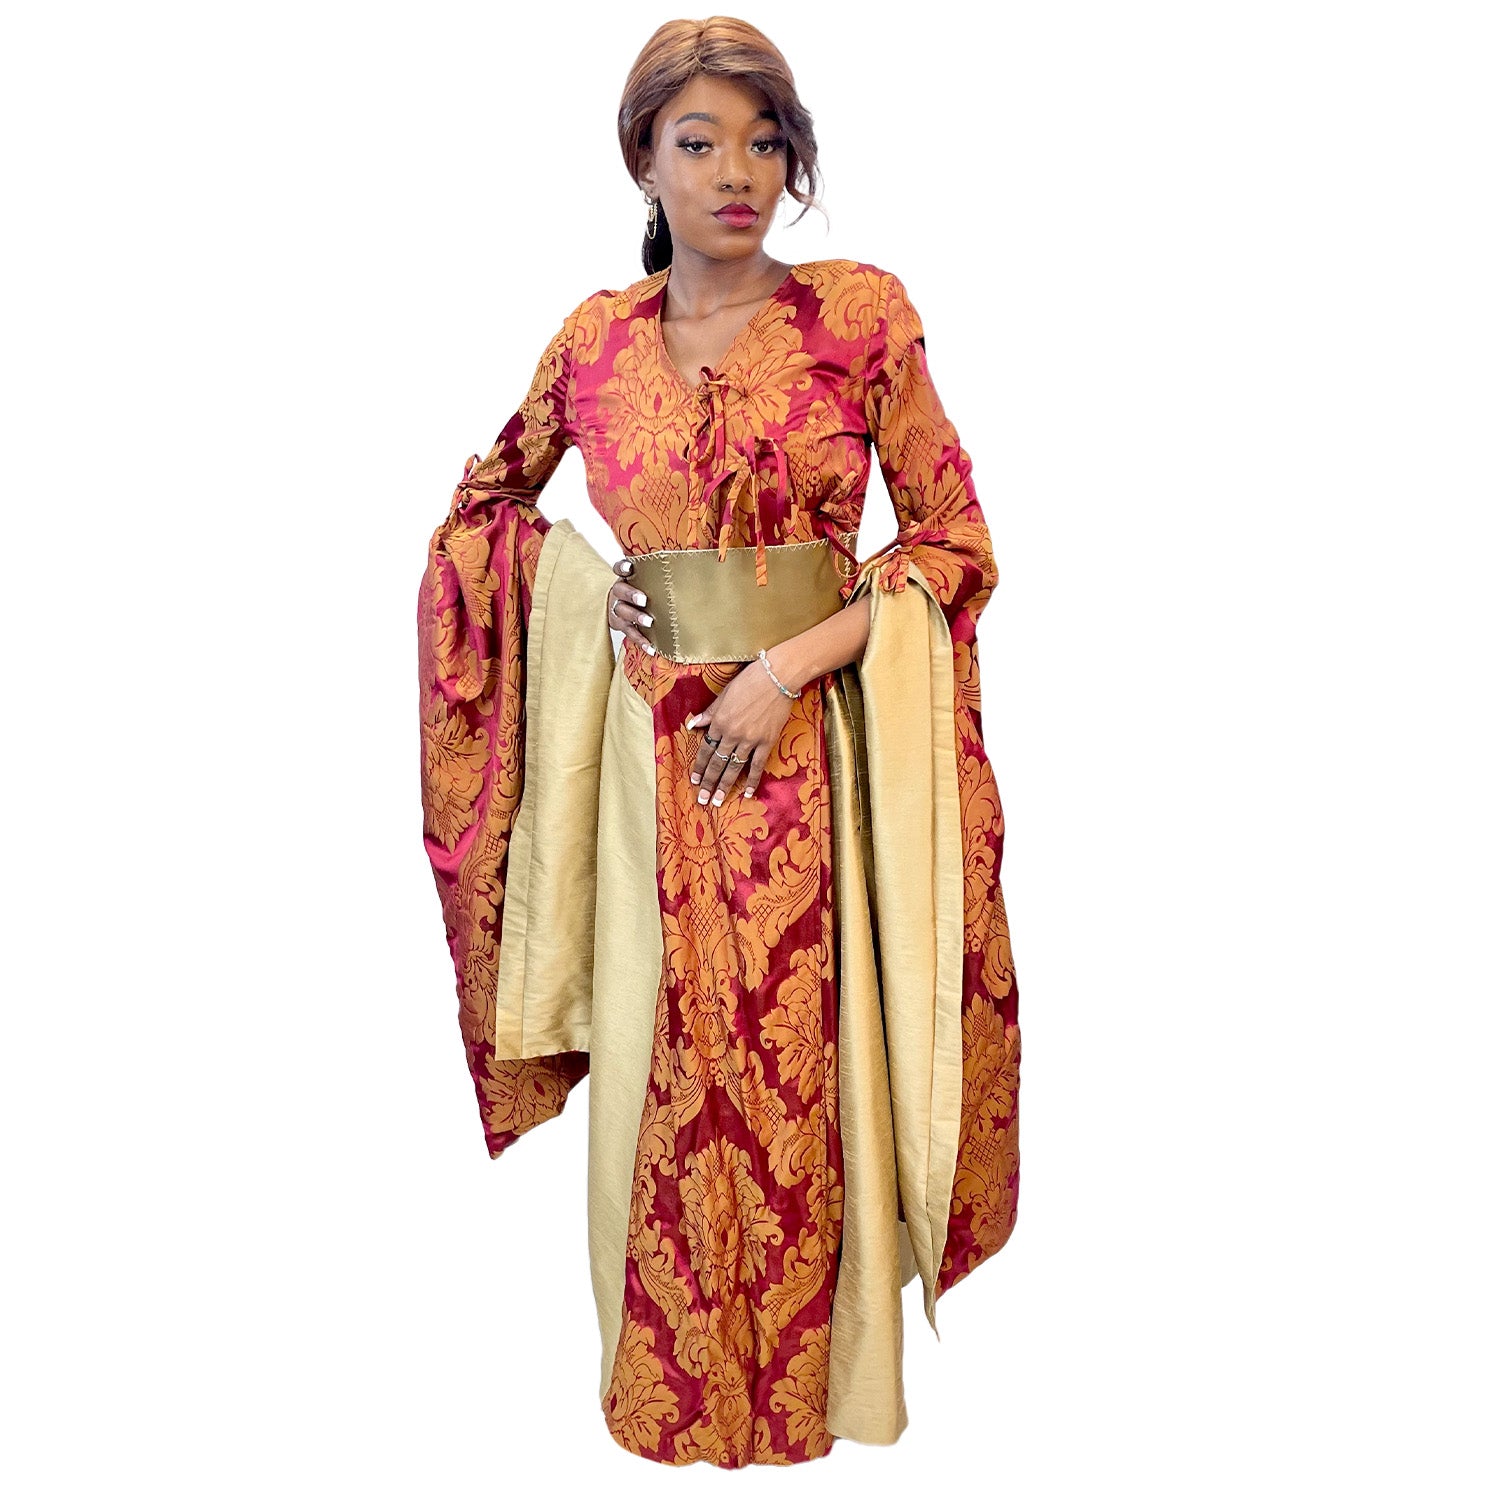 Exclusive Game of Thrones Cersei Lannister Adult Costume